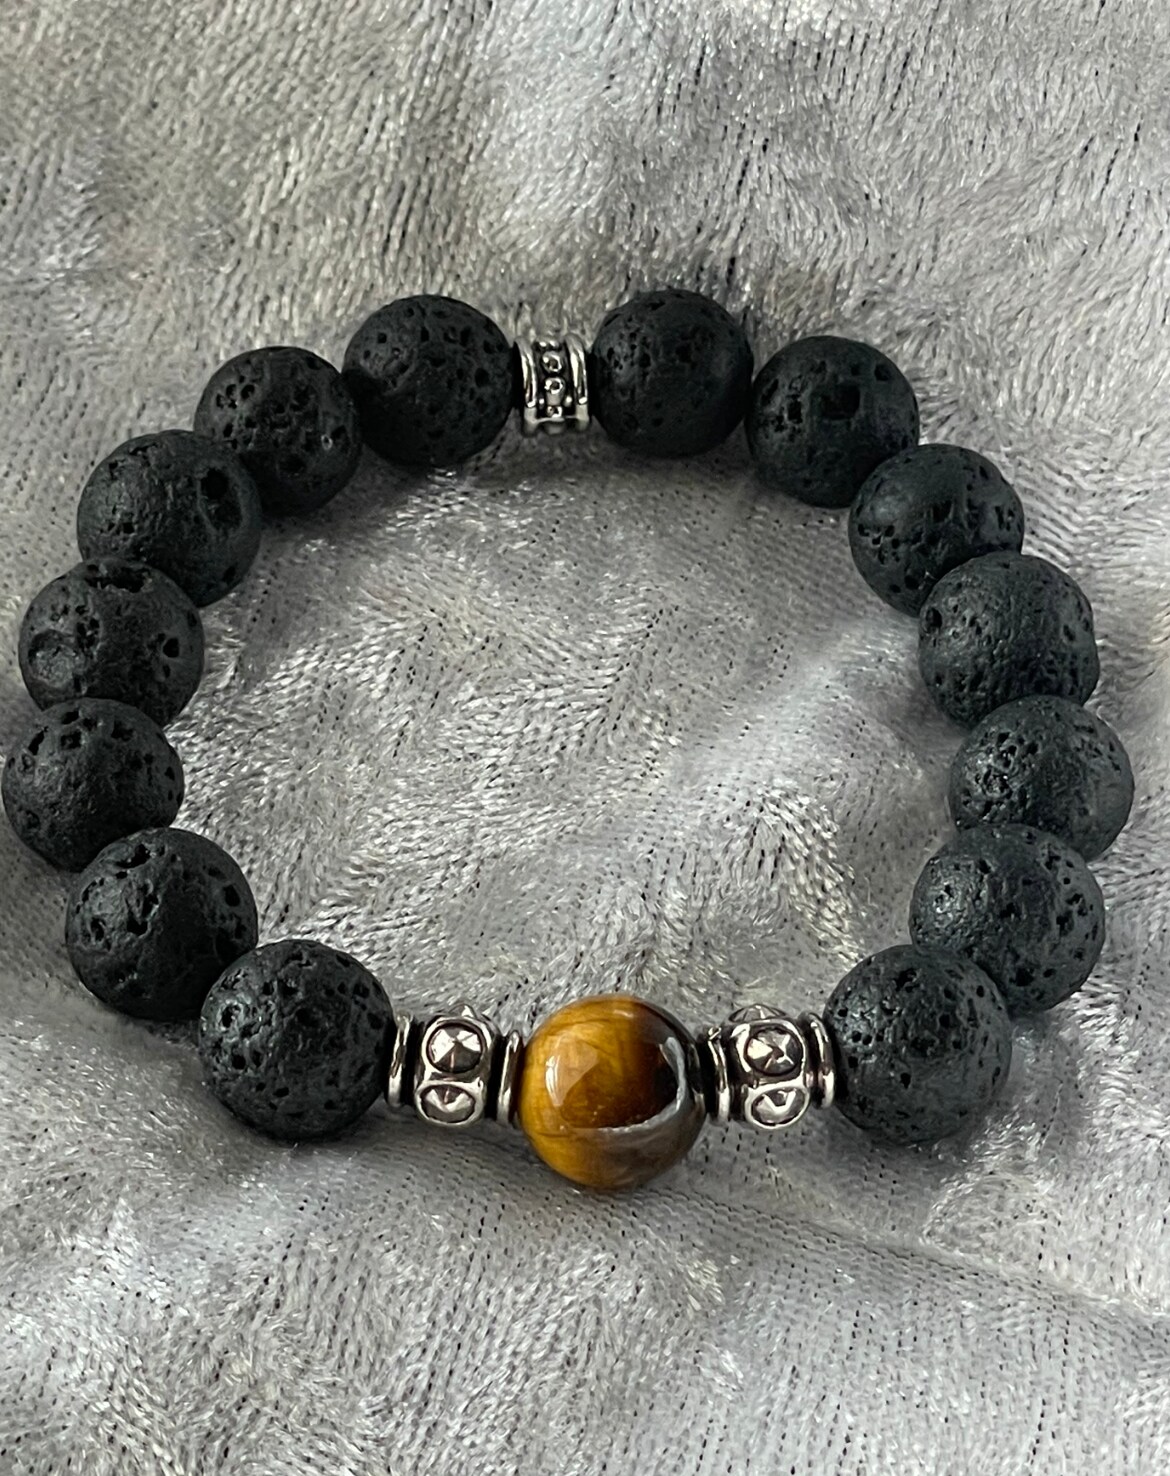 Essential Oils Aromatherapy Diffuser Bracelet or Necklace - MERMAID -  Amazonite Gemstone Lava Stone Jewelry : Amazon.in: Health & Personal Care